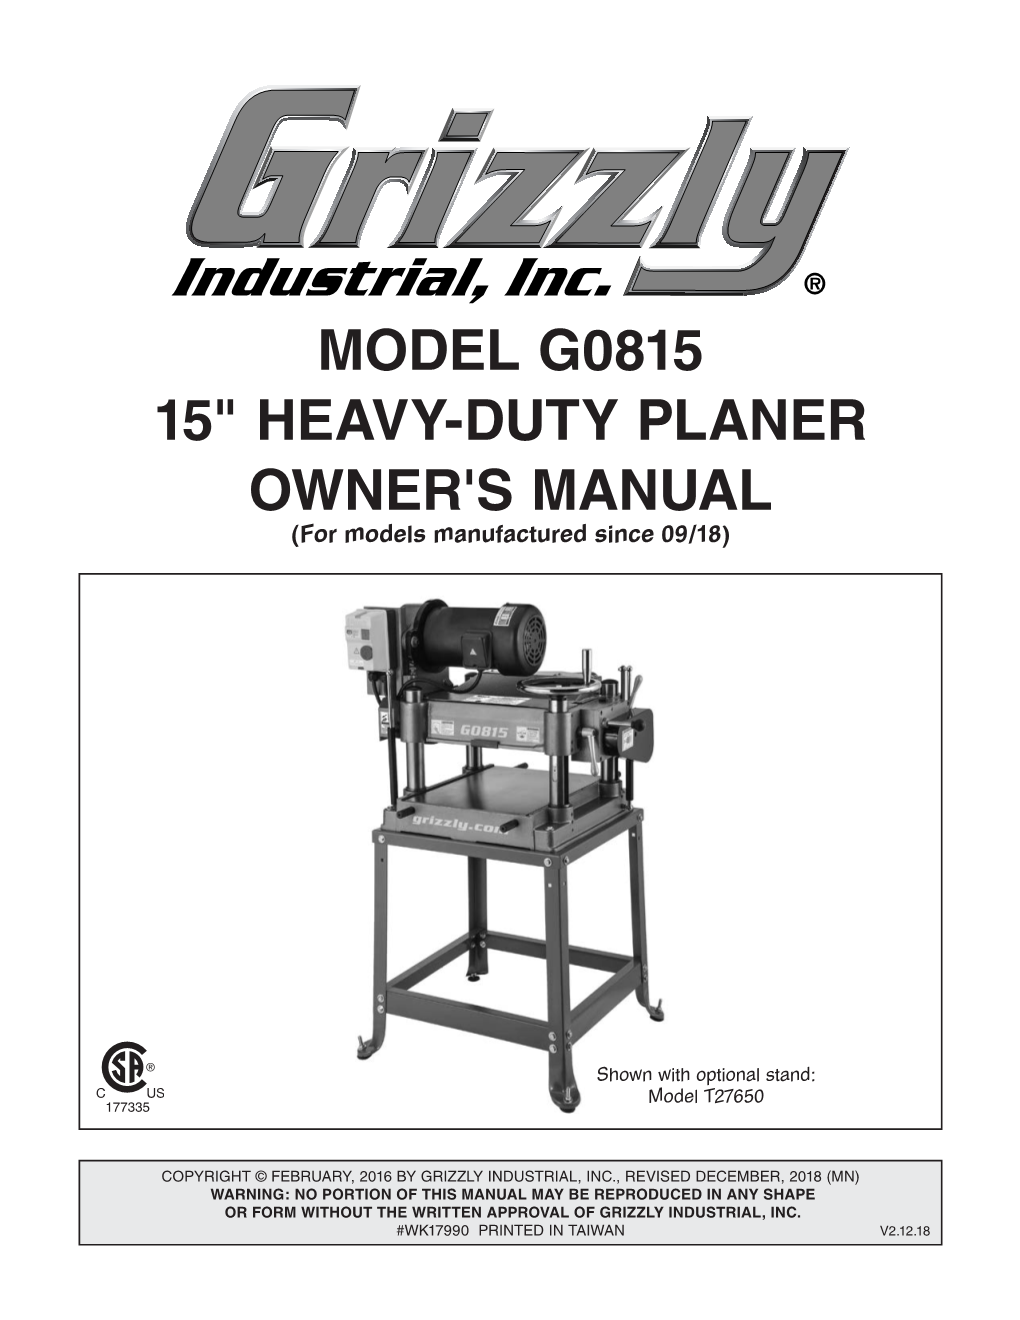 MODEL G0815 15" HEAVY-DUTY PLANER OWNER's MANUAL (For Models Manufactured Since 09/18)